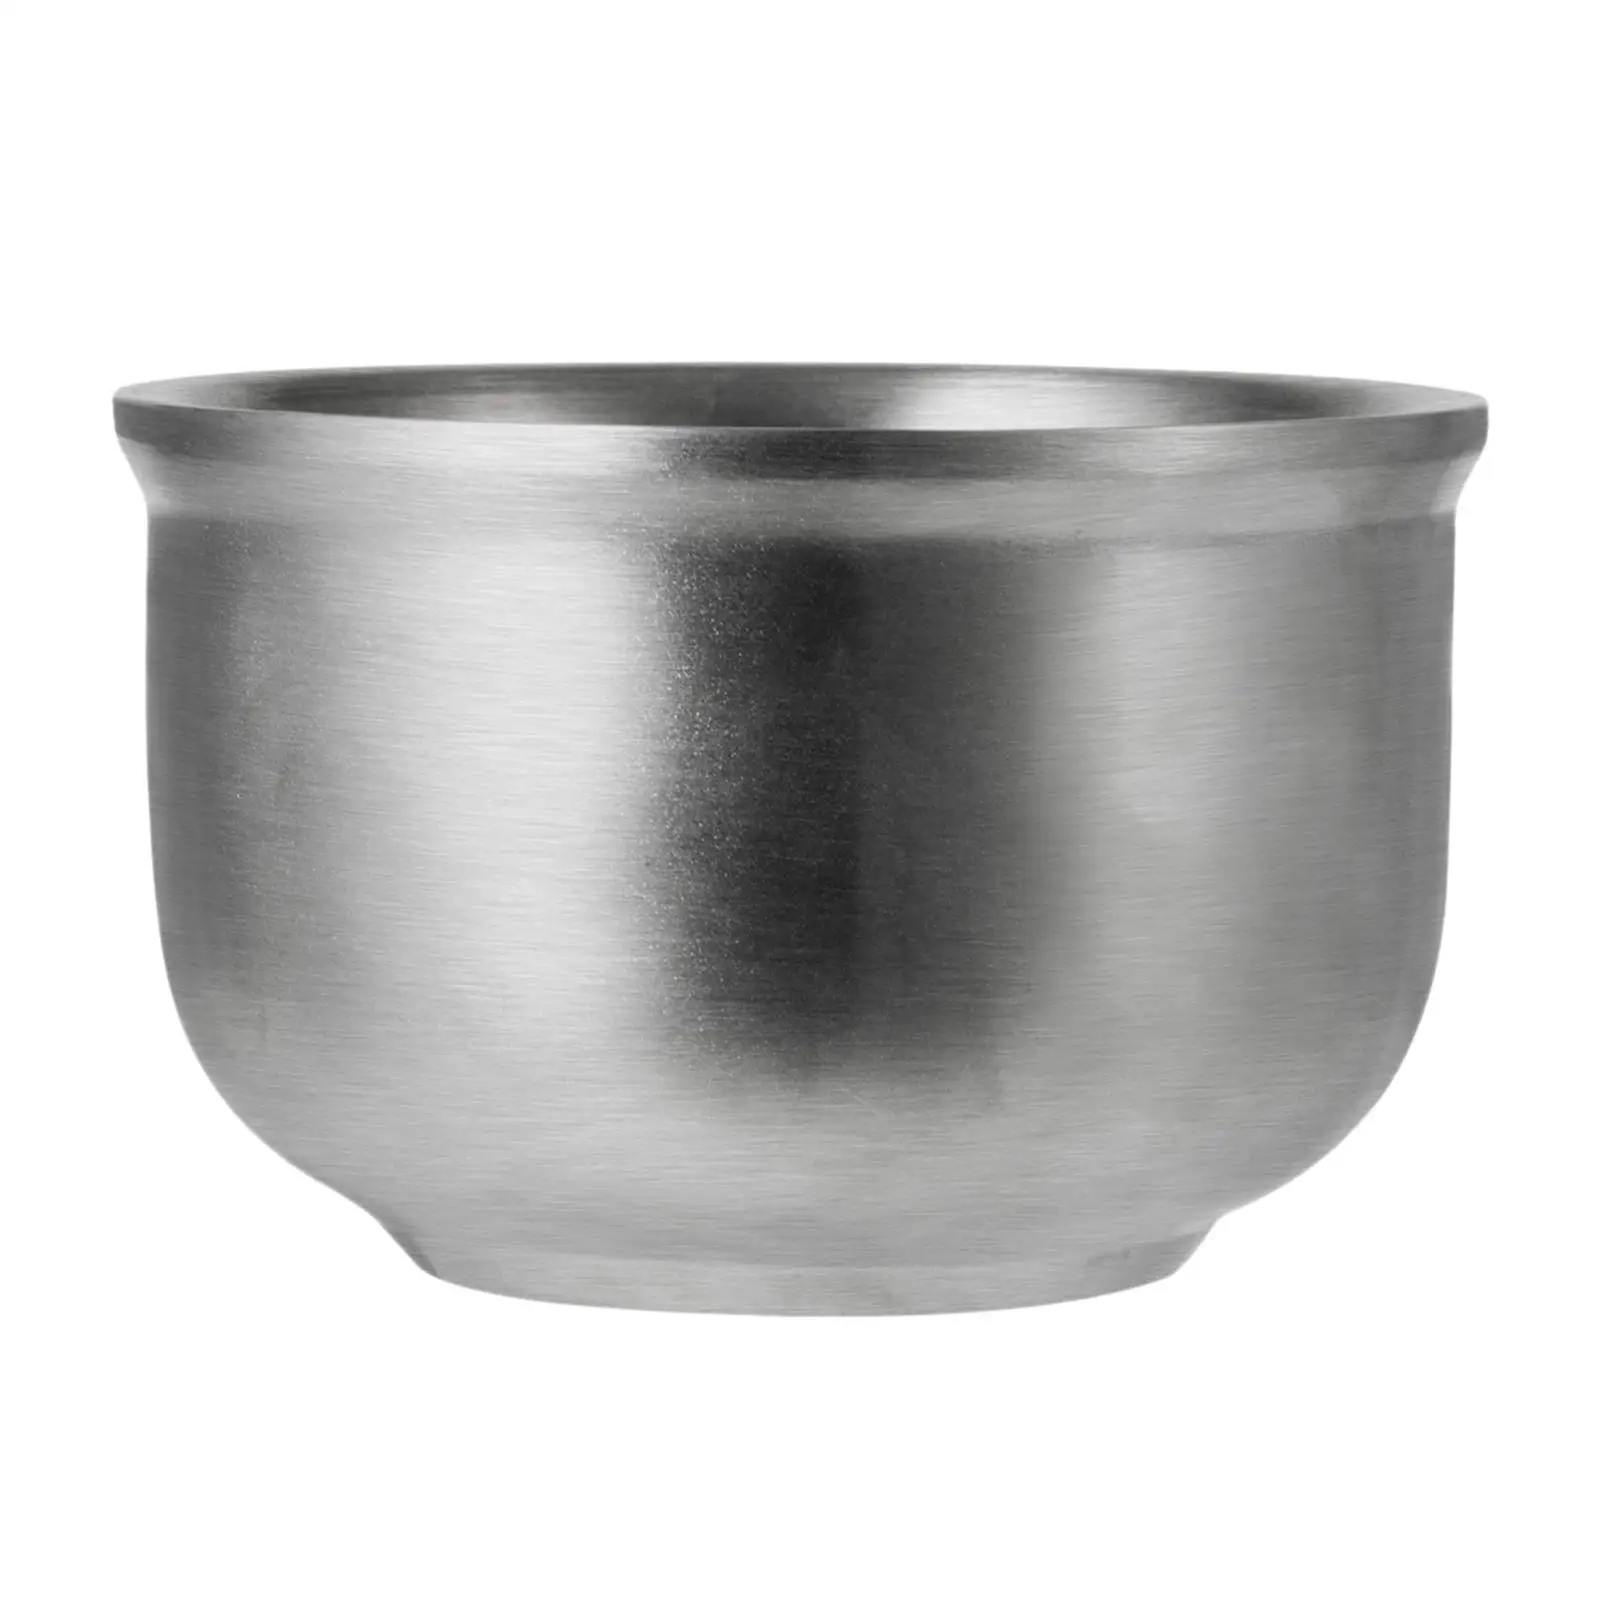 Shaving Bowl Stainless Steel Durable Heat Insulation Portable Produce Rich Foam Fits Wet Shave Shave Cream and Soap Bowl for Men